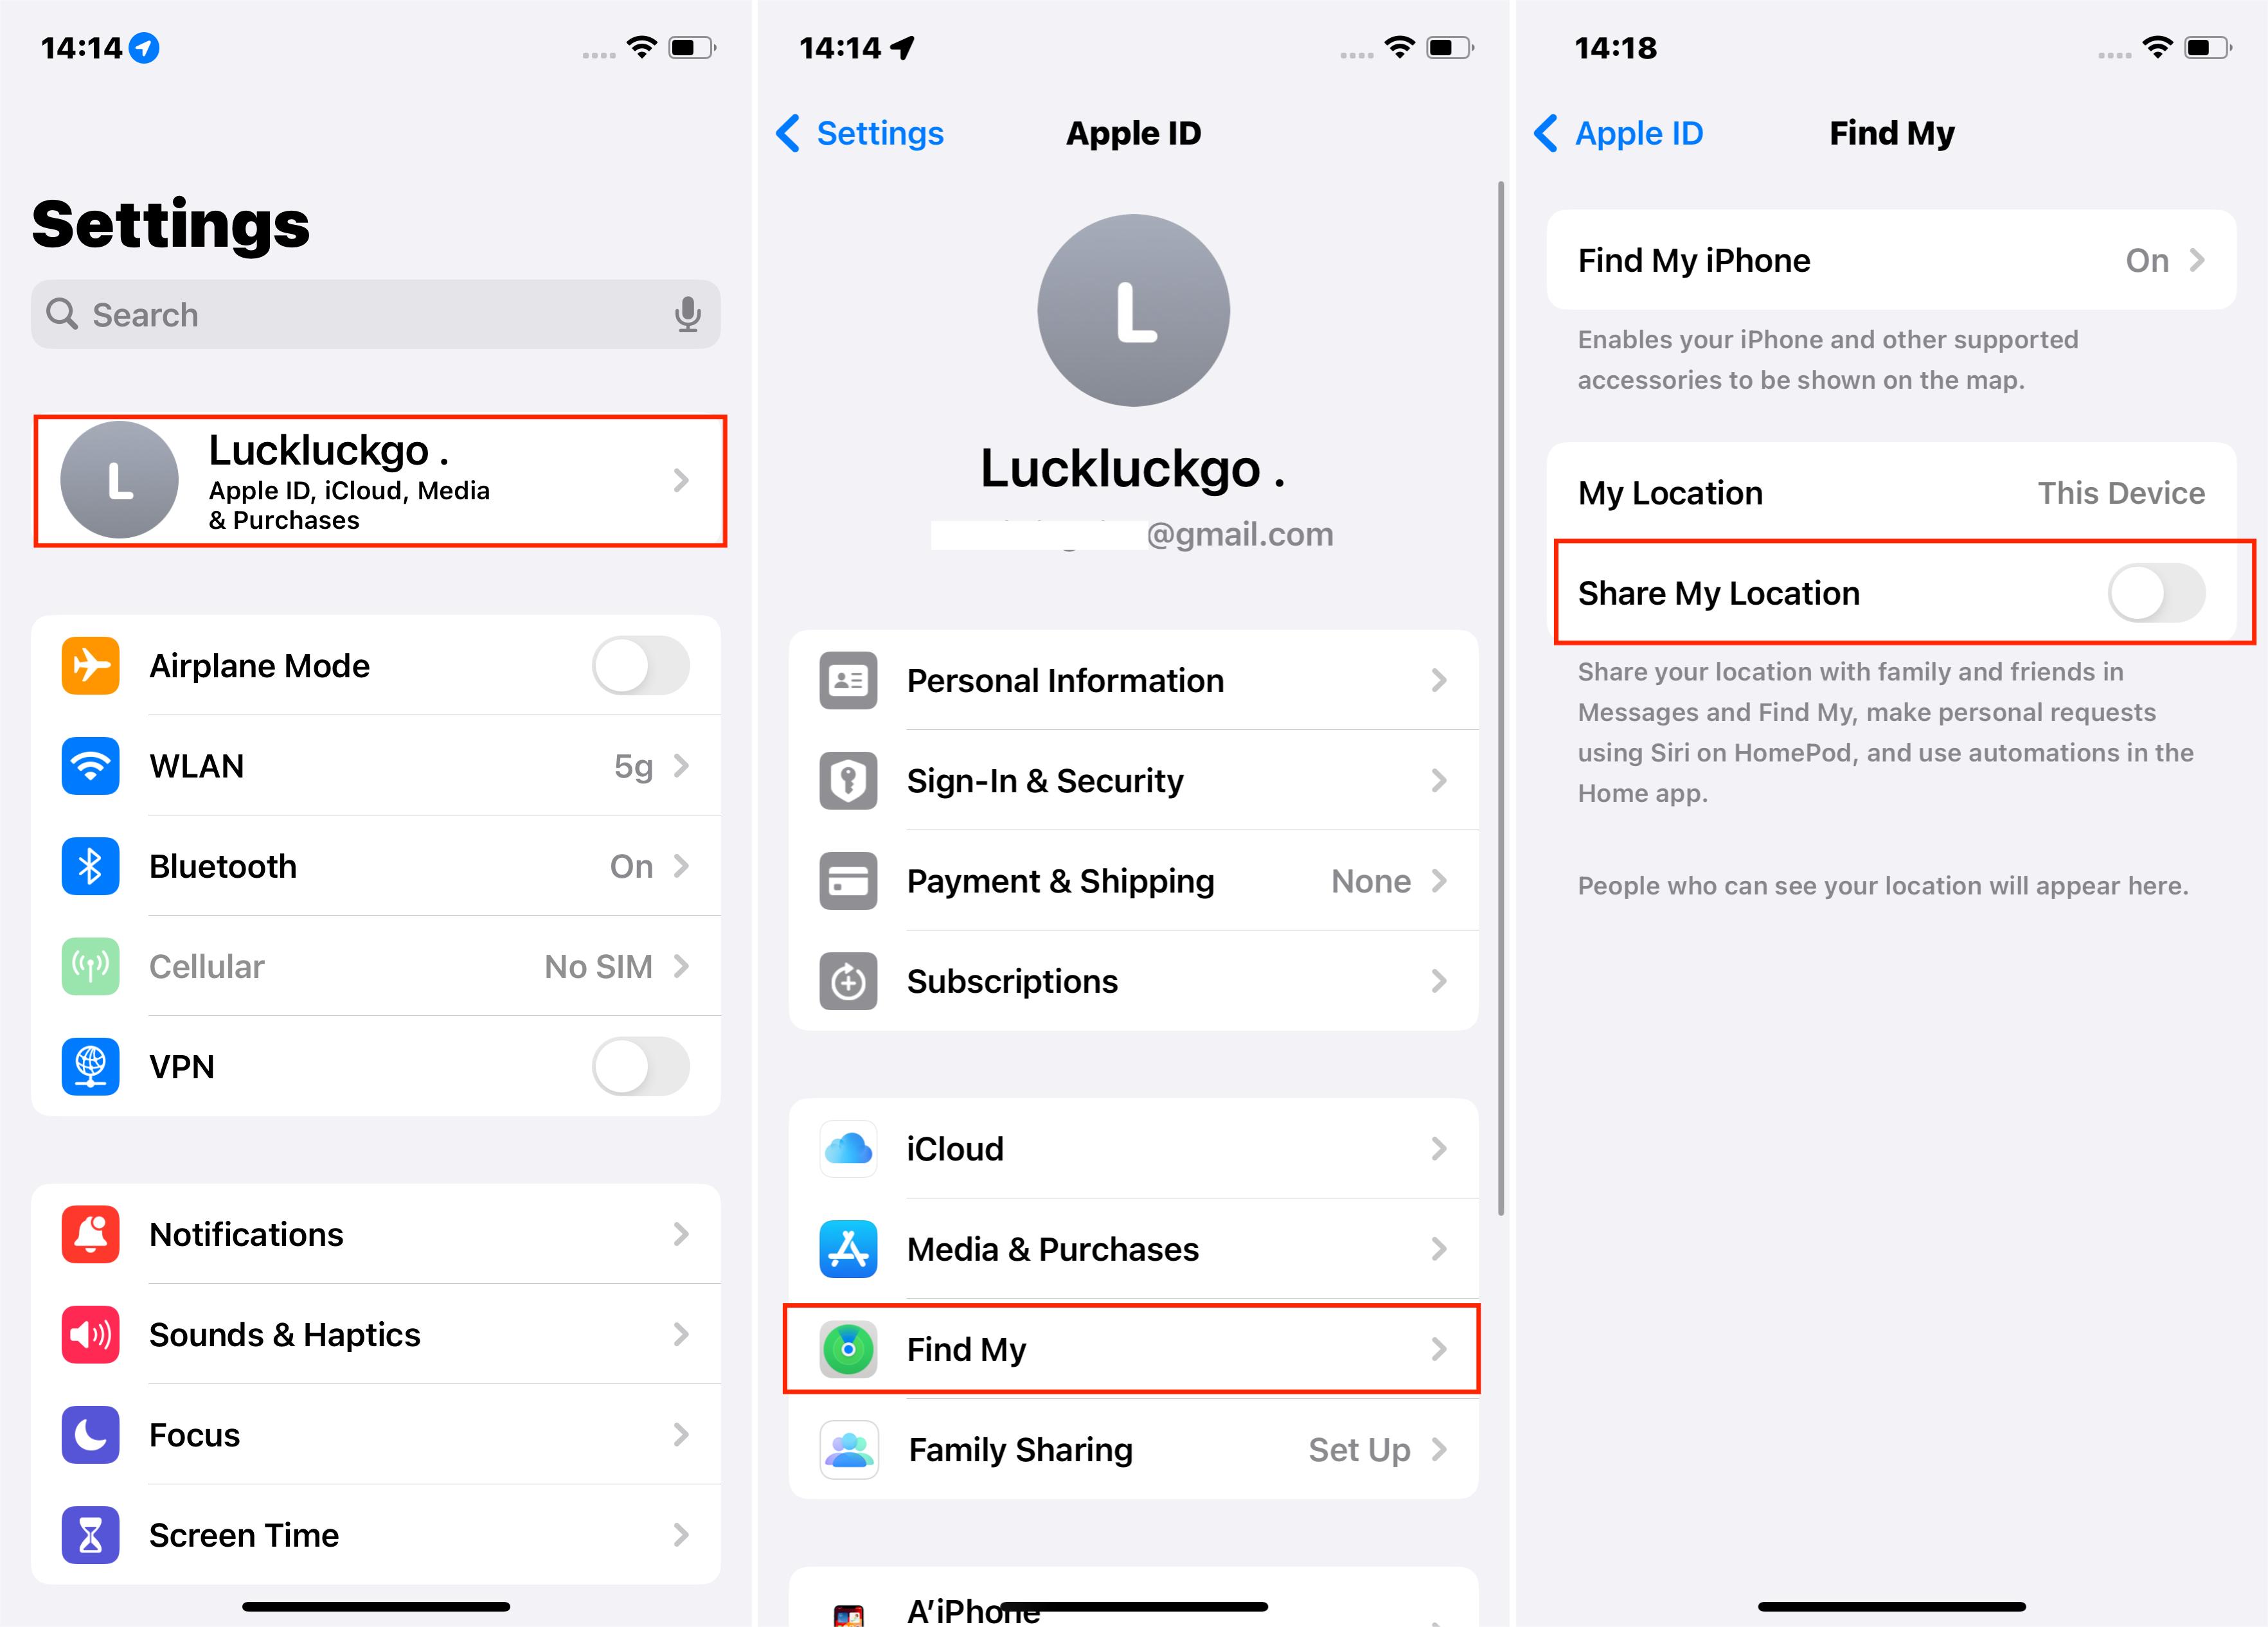 Steps to Turn off Share My Location for Find My via iPhone Settings